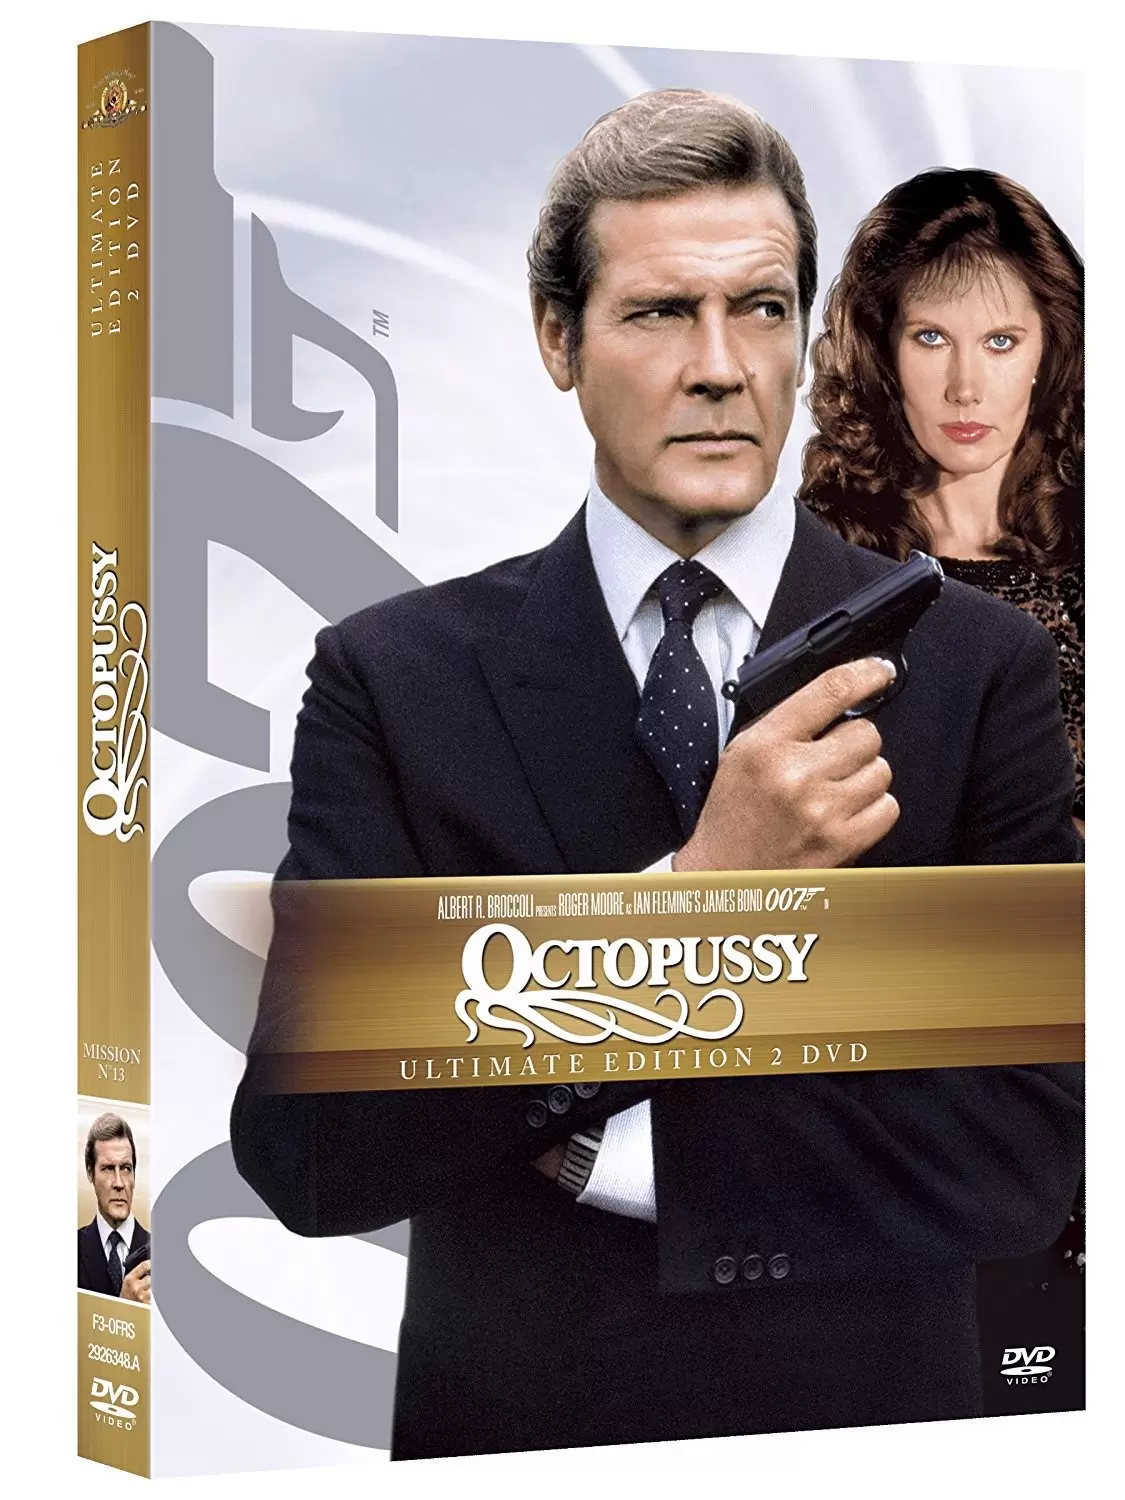 James Bond - Octopussy - Ultimate Edition